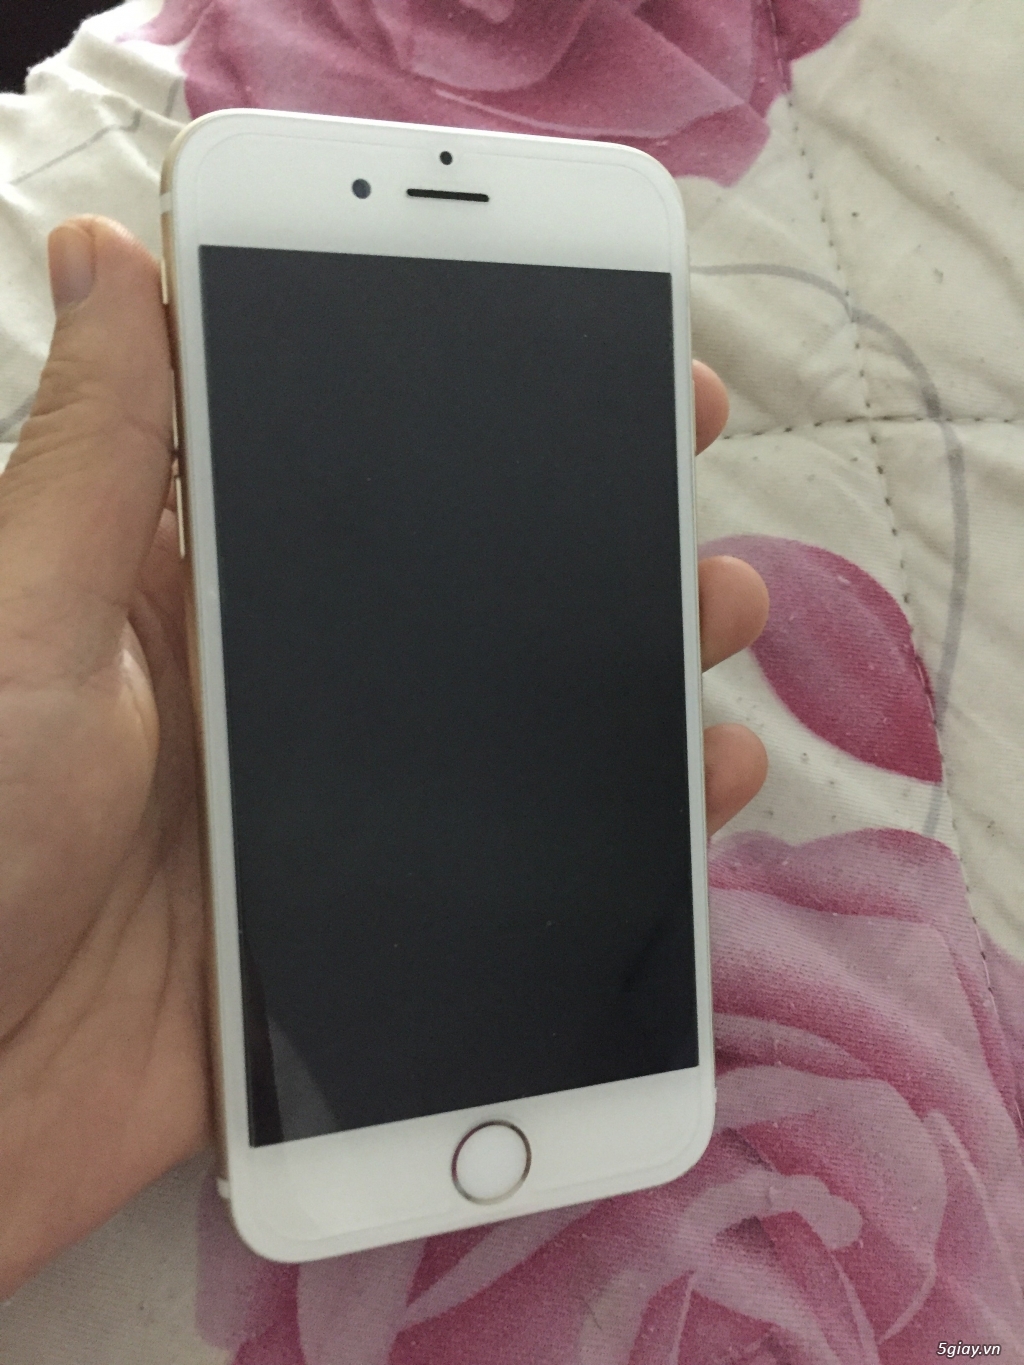 iphone 6 _64gb gold qt | 5giay